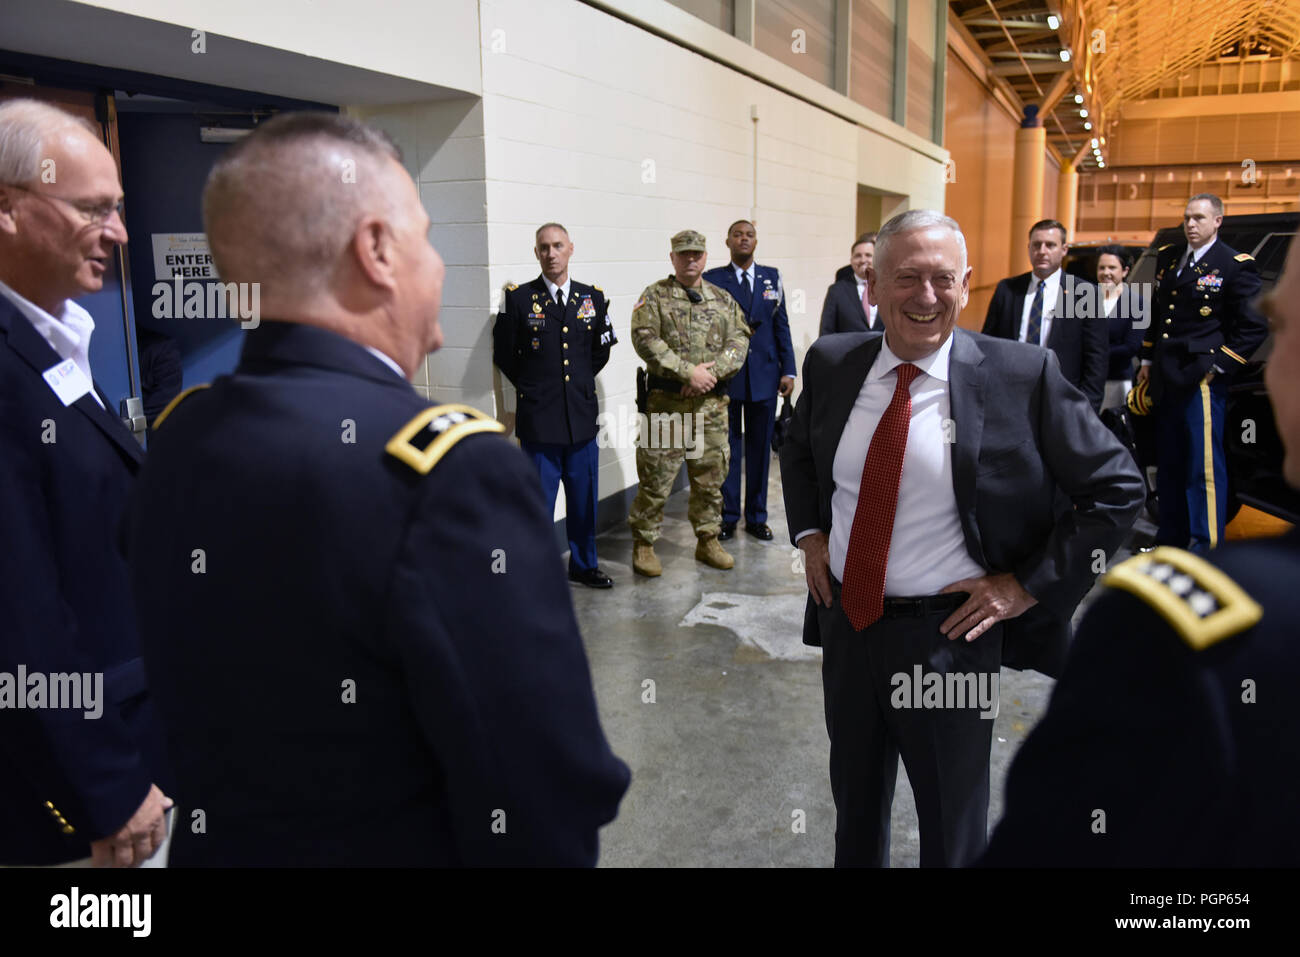 Secretary of Defense James Mattis arrives at the National Guard Association of the United States 140th General Conference, New Orleans, Louisiana, Aug. 25, 2018. (U.S. Army National Guard photo by Sgt. 1st Class Jim Greenhill) Stock Photo